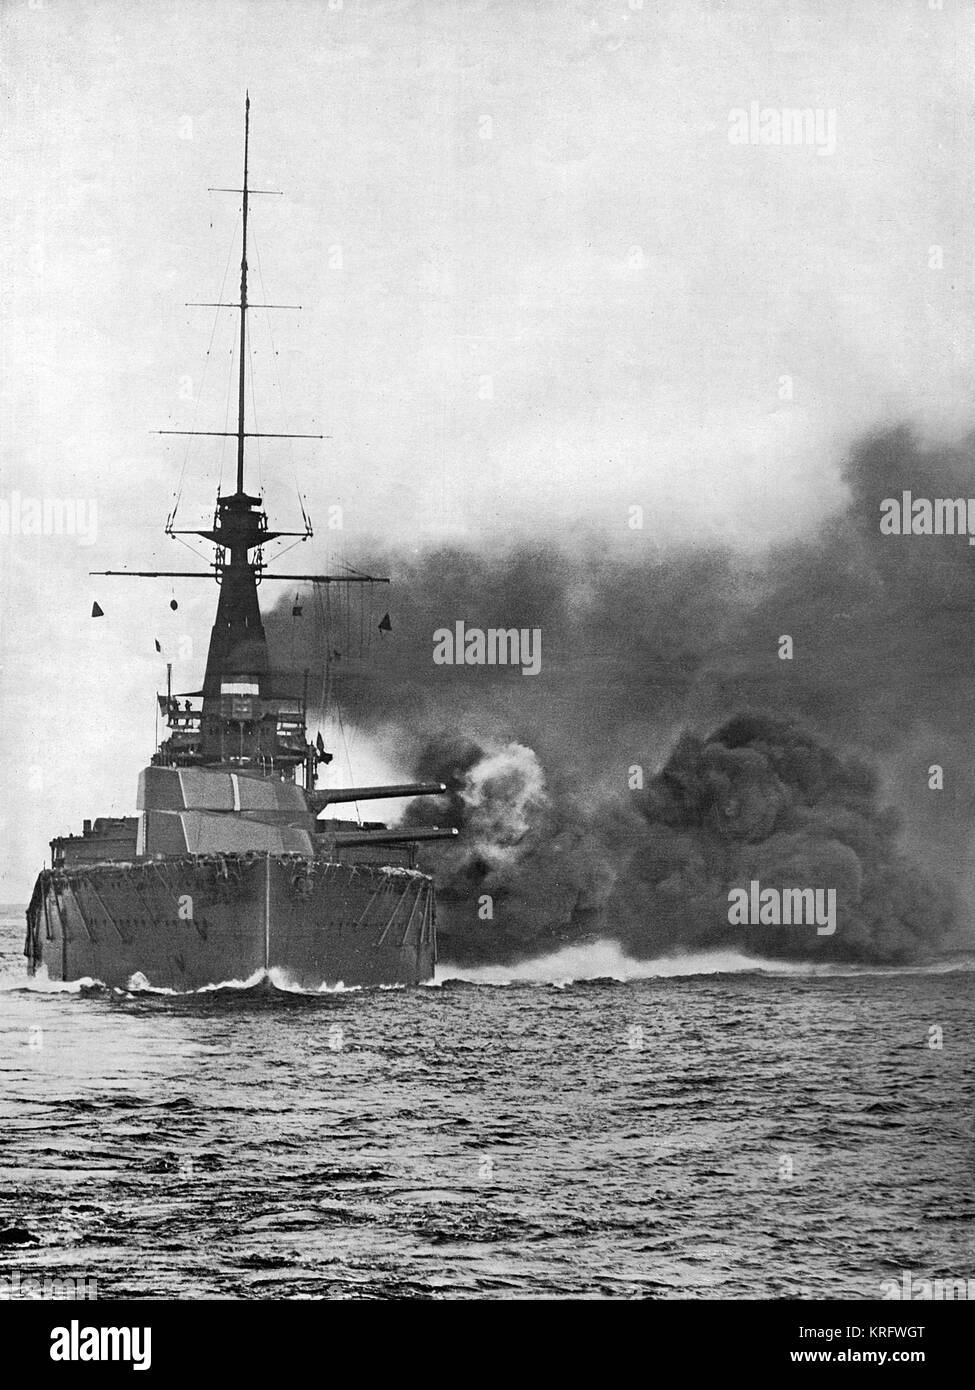 The Orion-class British battleship, H.M.S. 'Monarch', firing her broadside of 13.5 inch guns.  She served in the 2nd Battle Squadron of the Grand Fleet in World War I, and fought at the Battle of Jutland, 31 May 1916, suffering no damage.       Date: 1914 Stock Photo